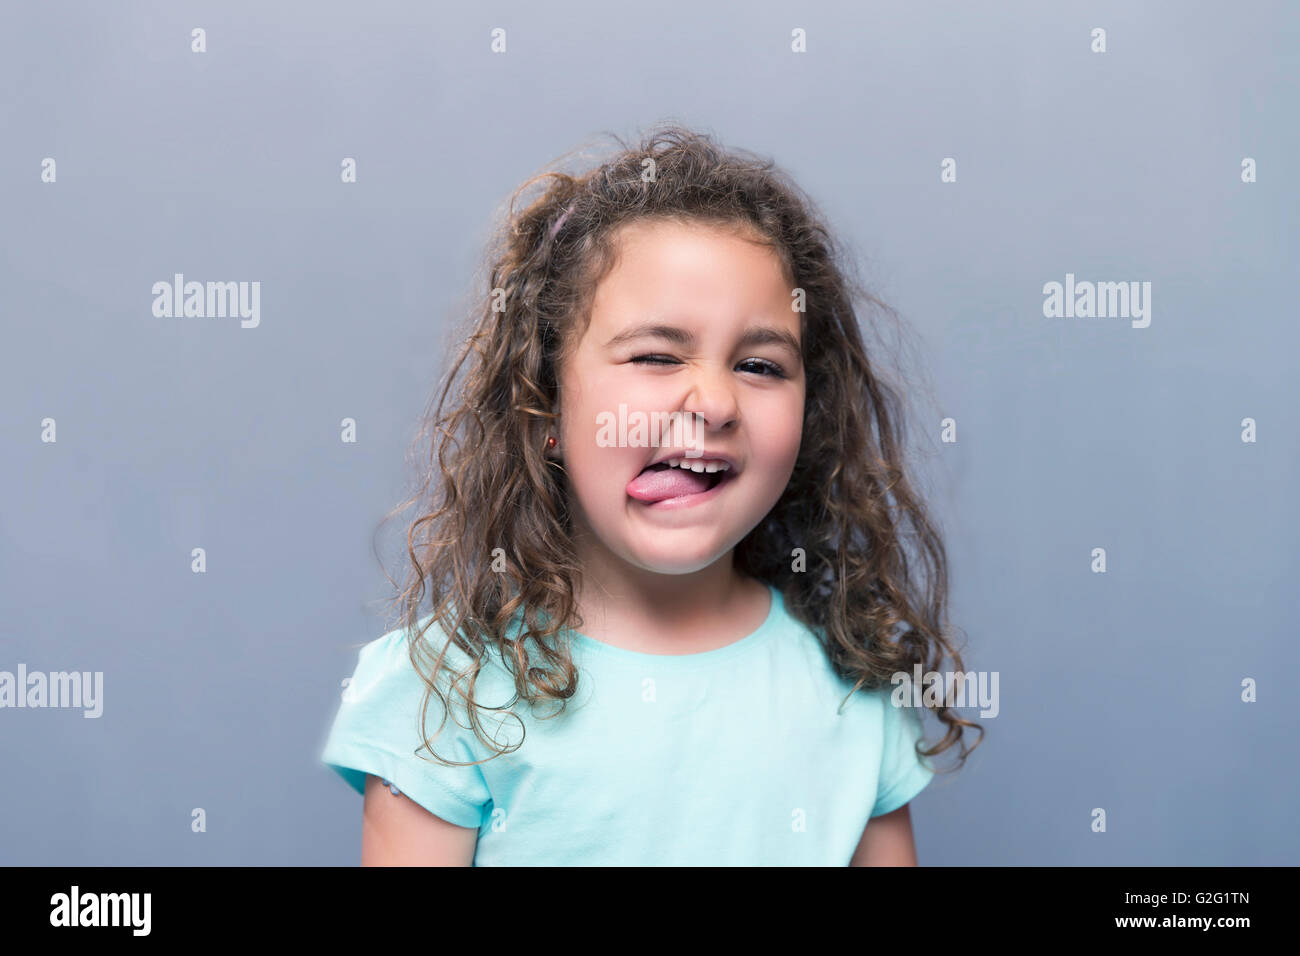 Portrait of cute curly-haired girl showing tongue and squinting eyes.Isolated Stock Photo